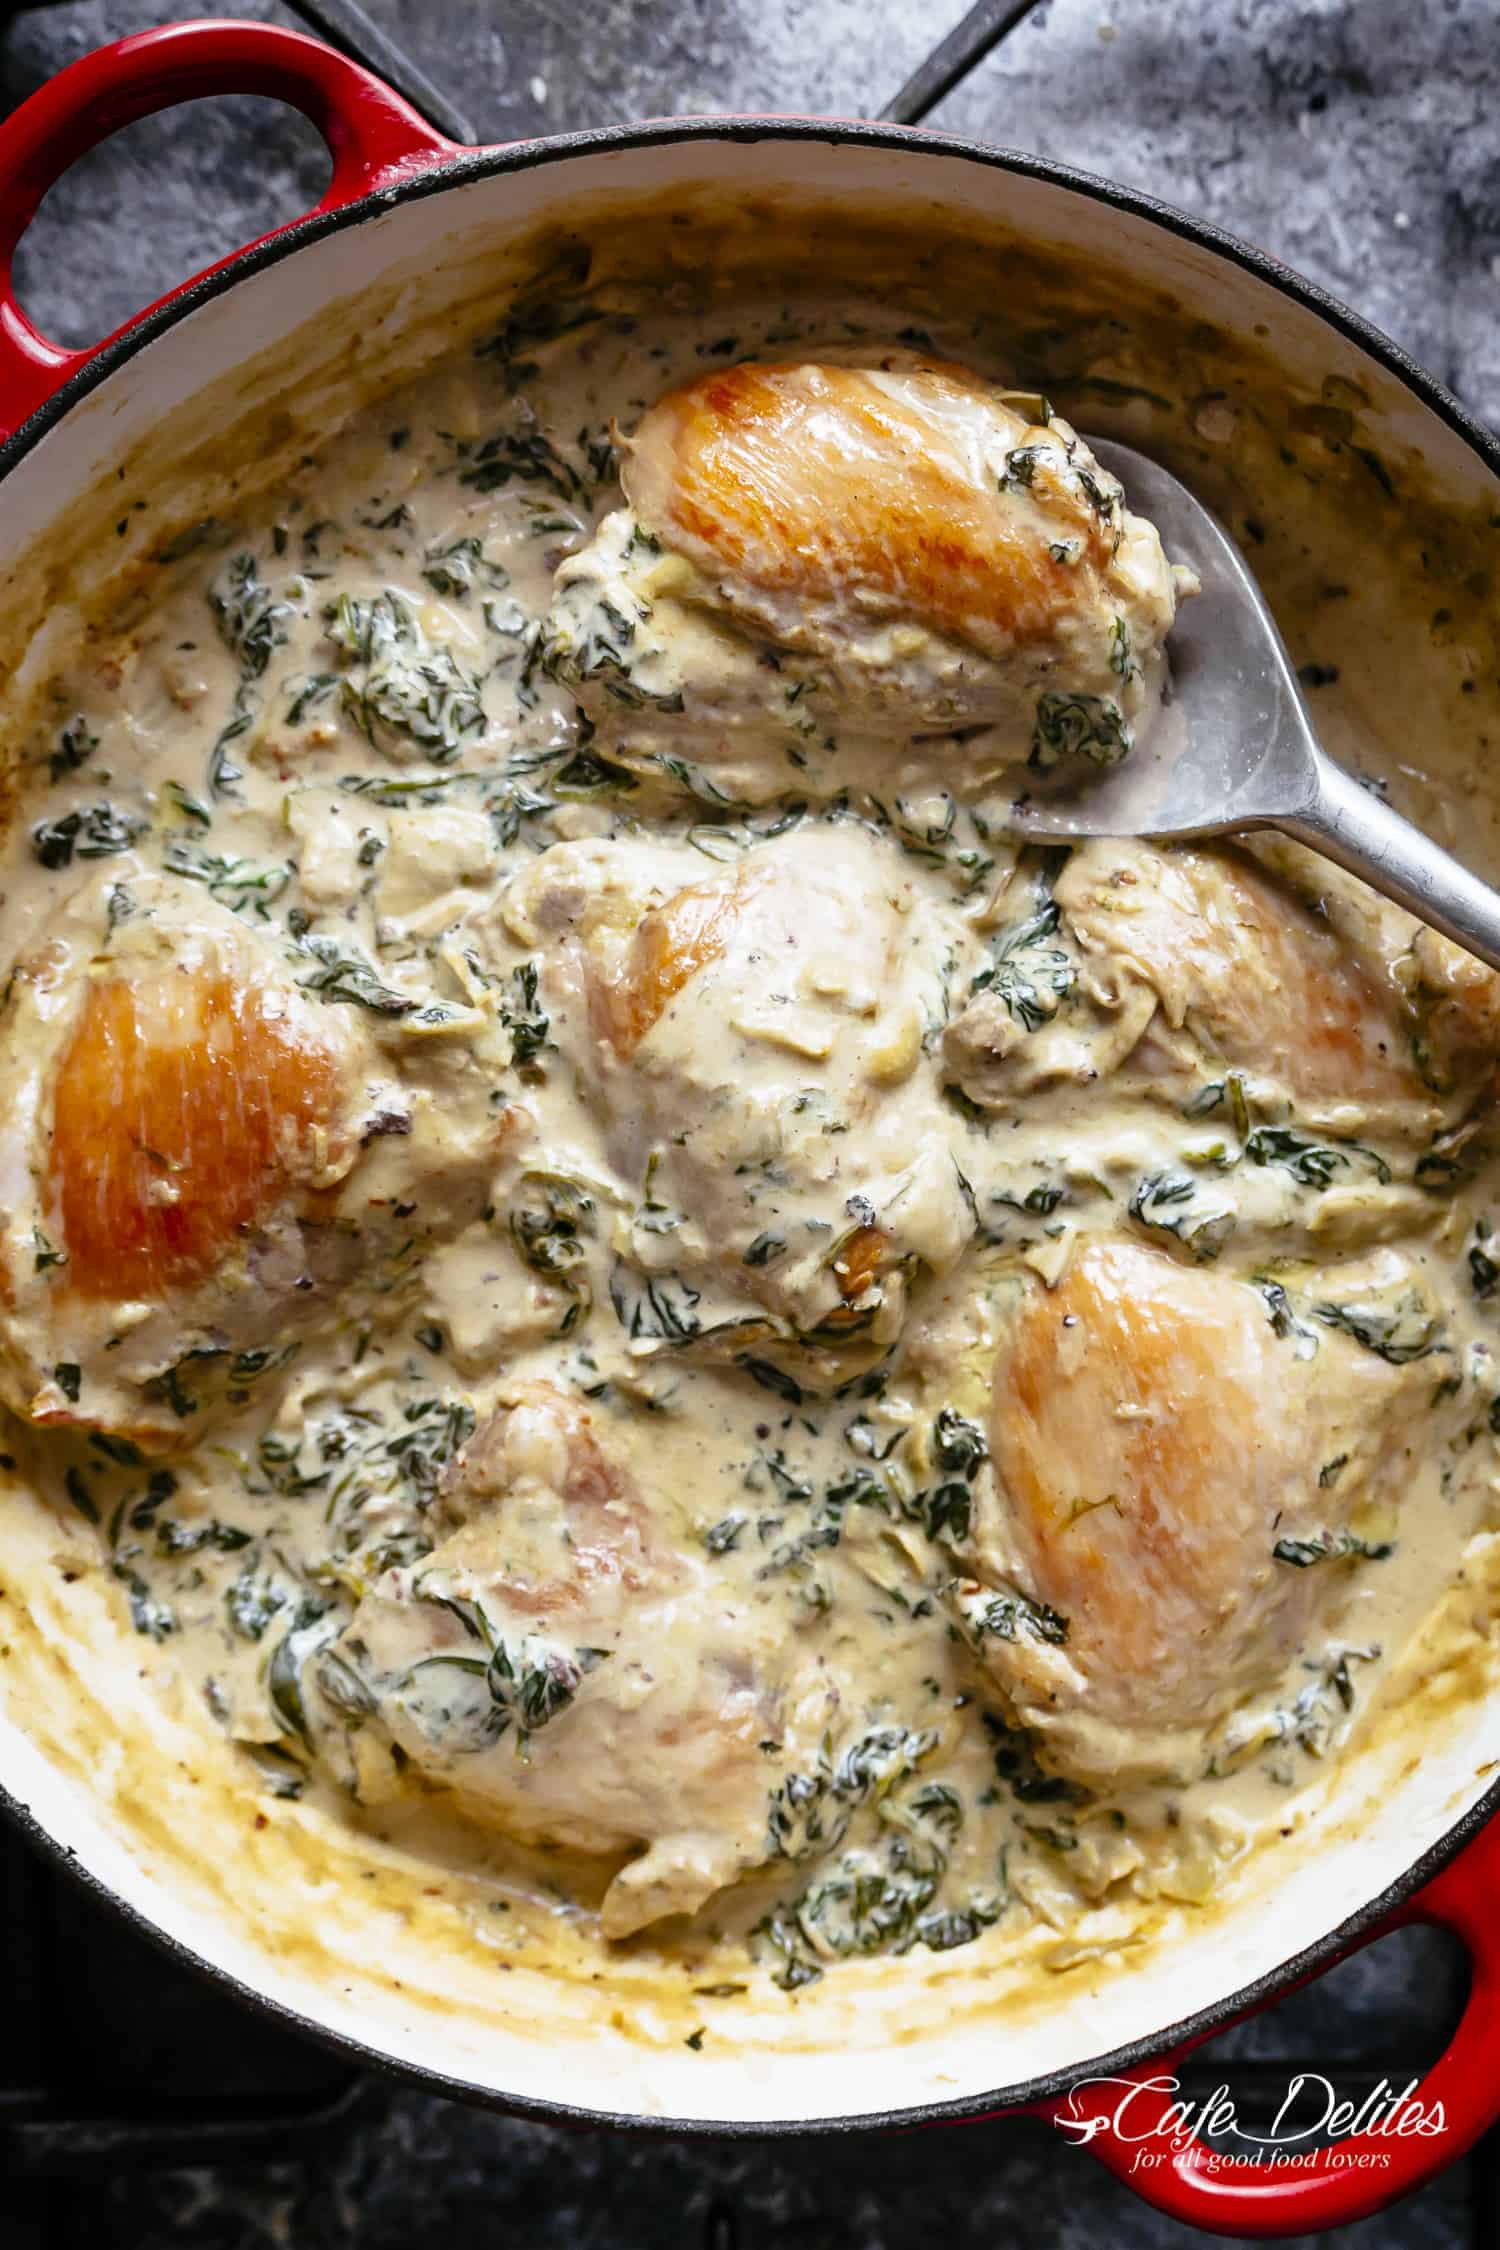 Spinach Artichoke Dip: The Irresistibly Creamy Recipe You've Been Craving